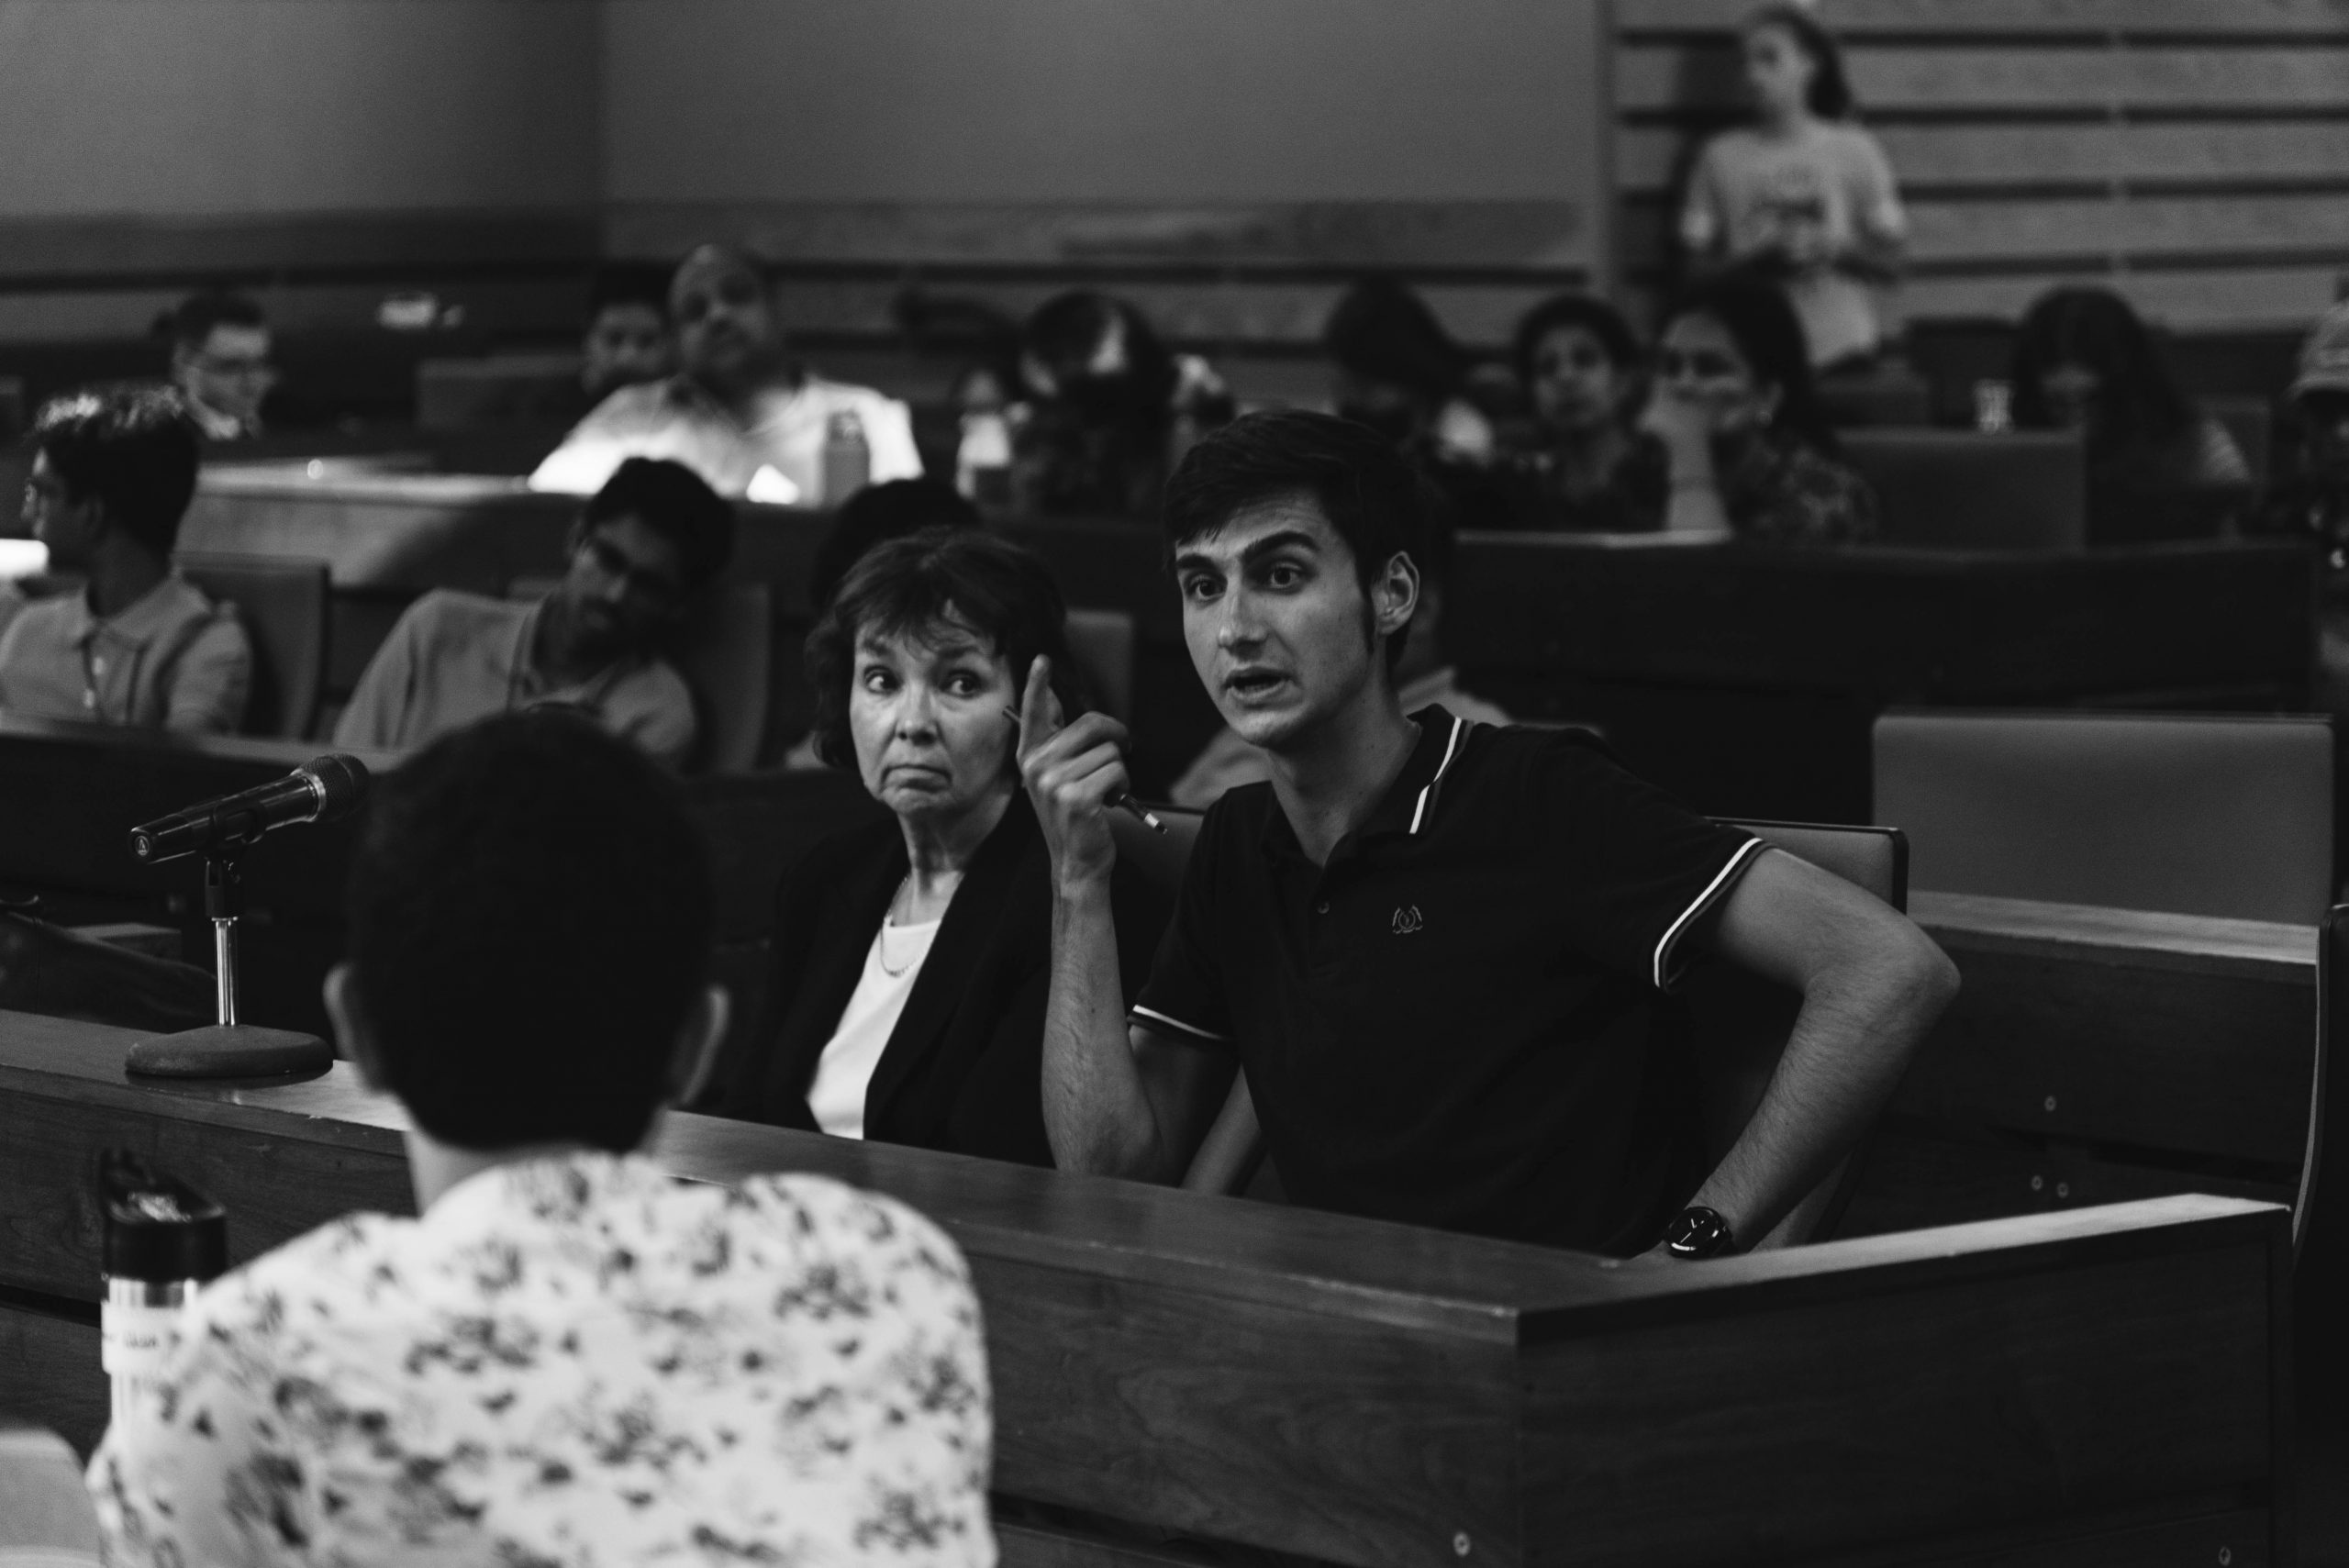 Black and white image of a man speaking while gesturing with his hand. A woman is seating next to him.